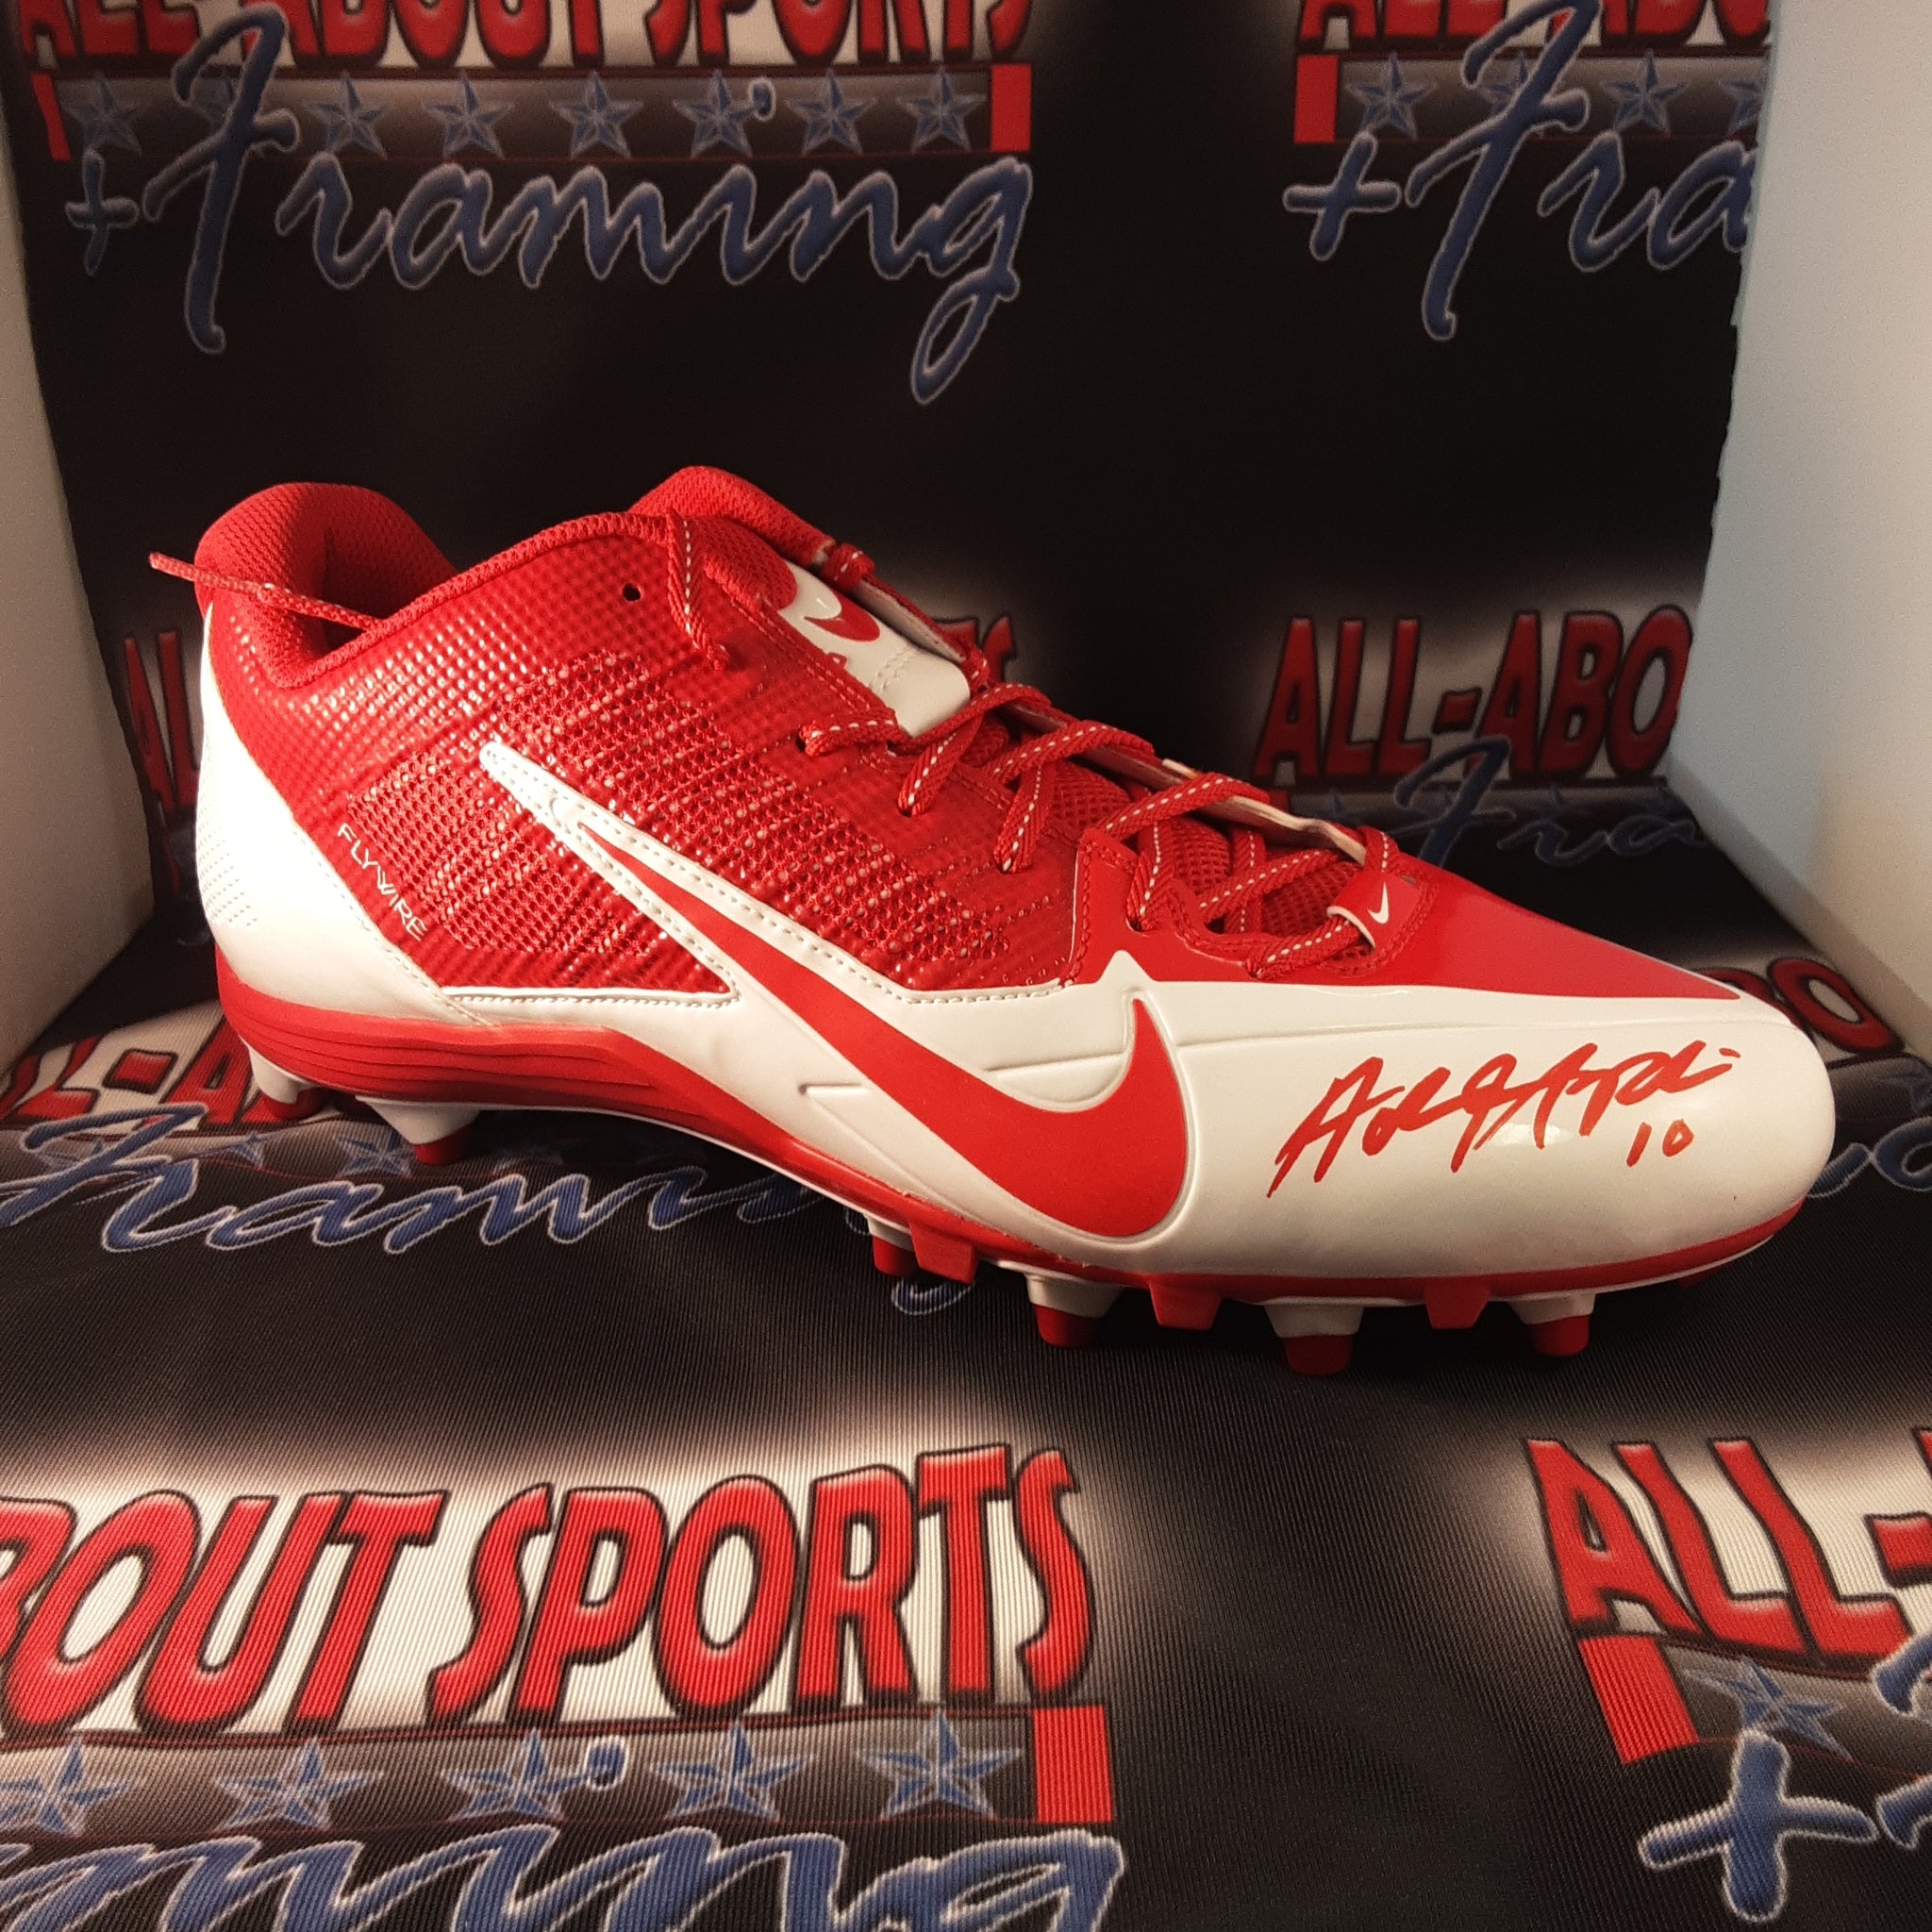 Adam Humphries Authentic Signed Tampa Bay Buccaneers Right Cleat Autographed JSA